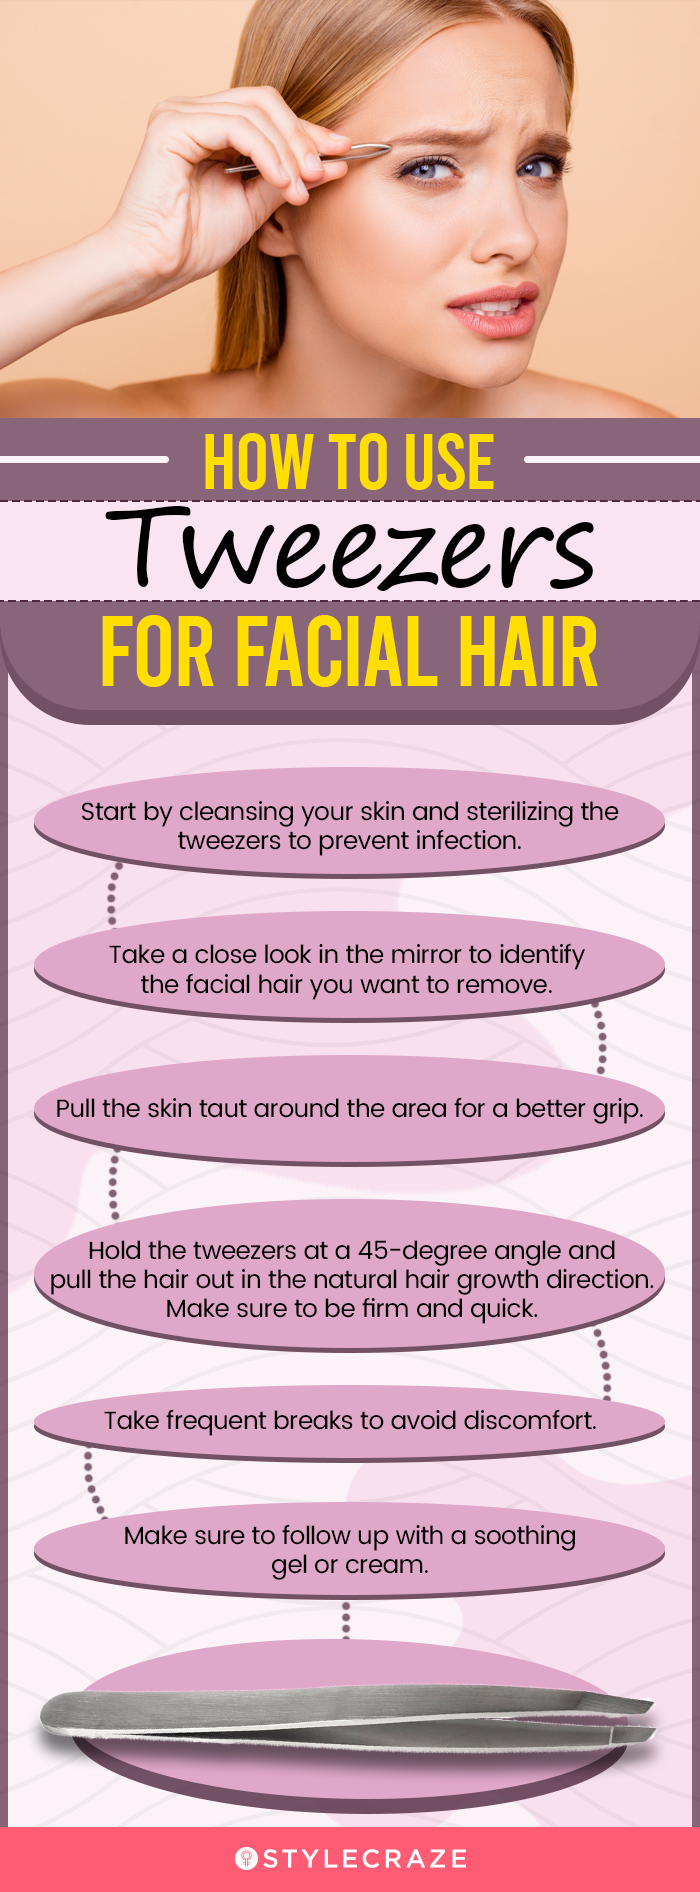 How To Use Tweezers For Facial Hair (infographic)